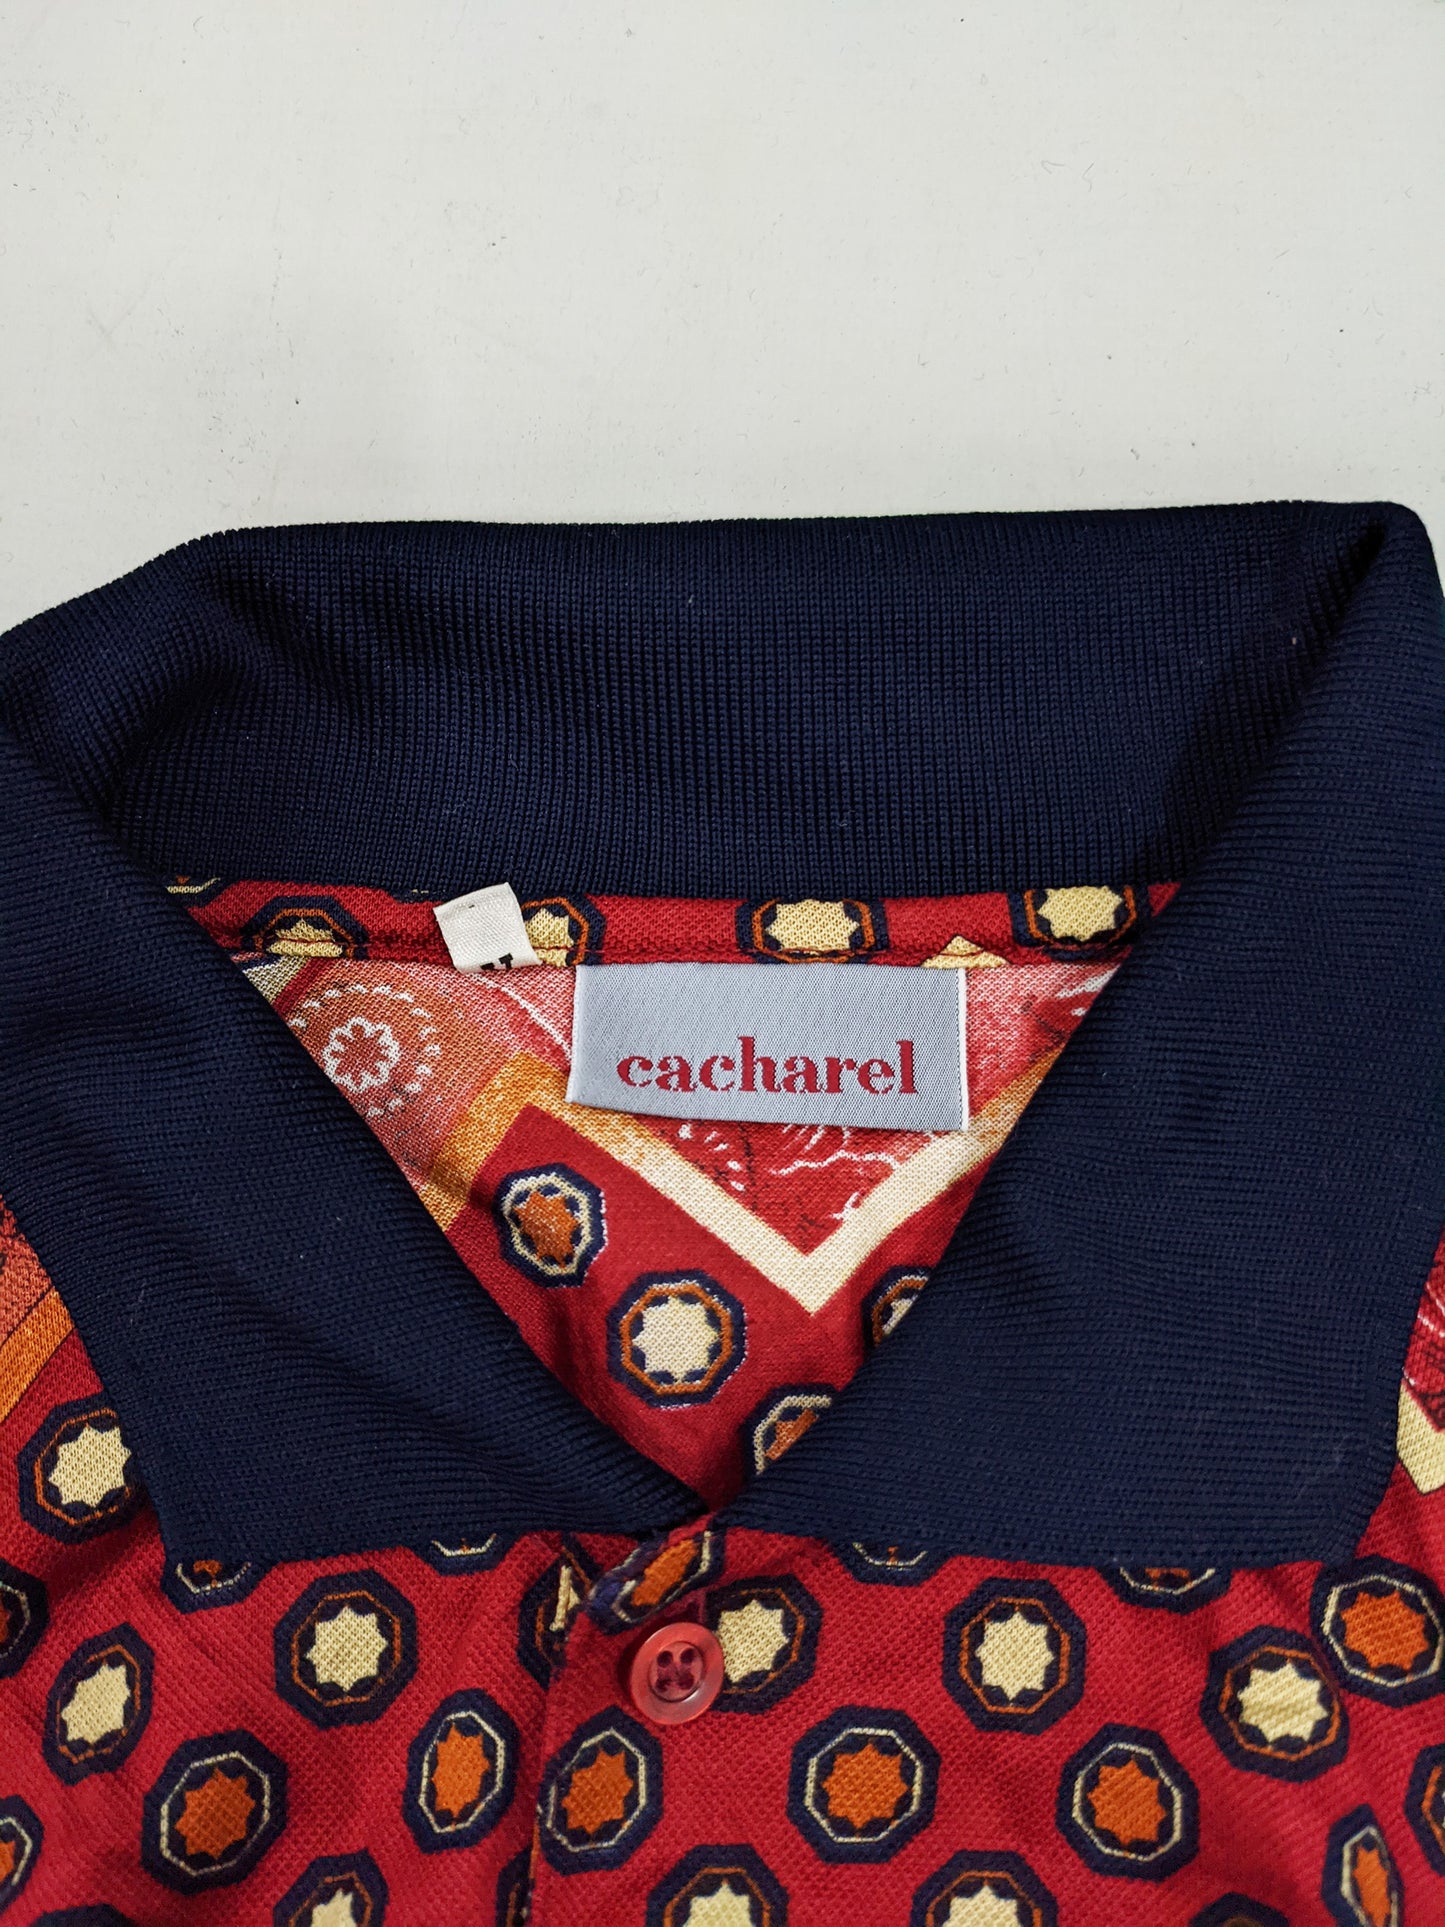 Mens Vintage Red & Navy Patterned Polo Shirt, 1980s